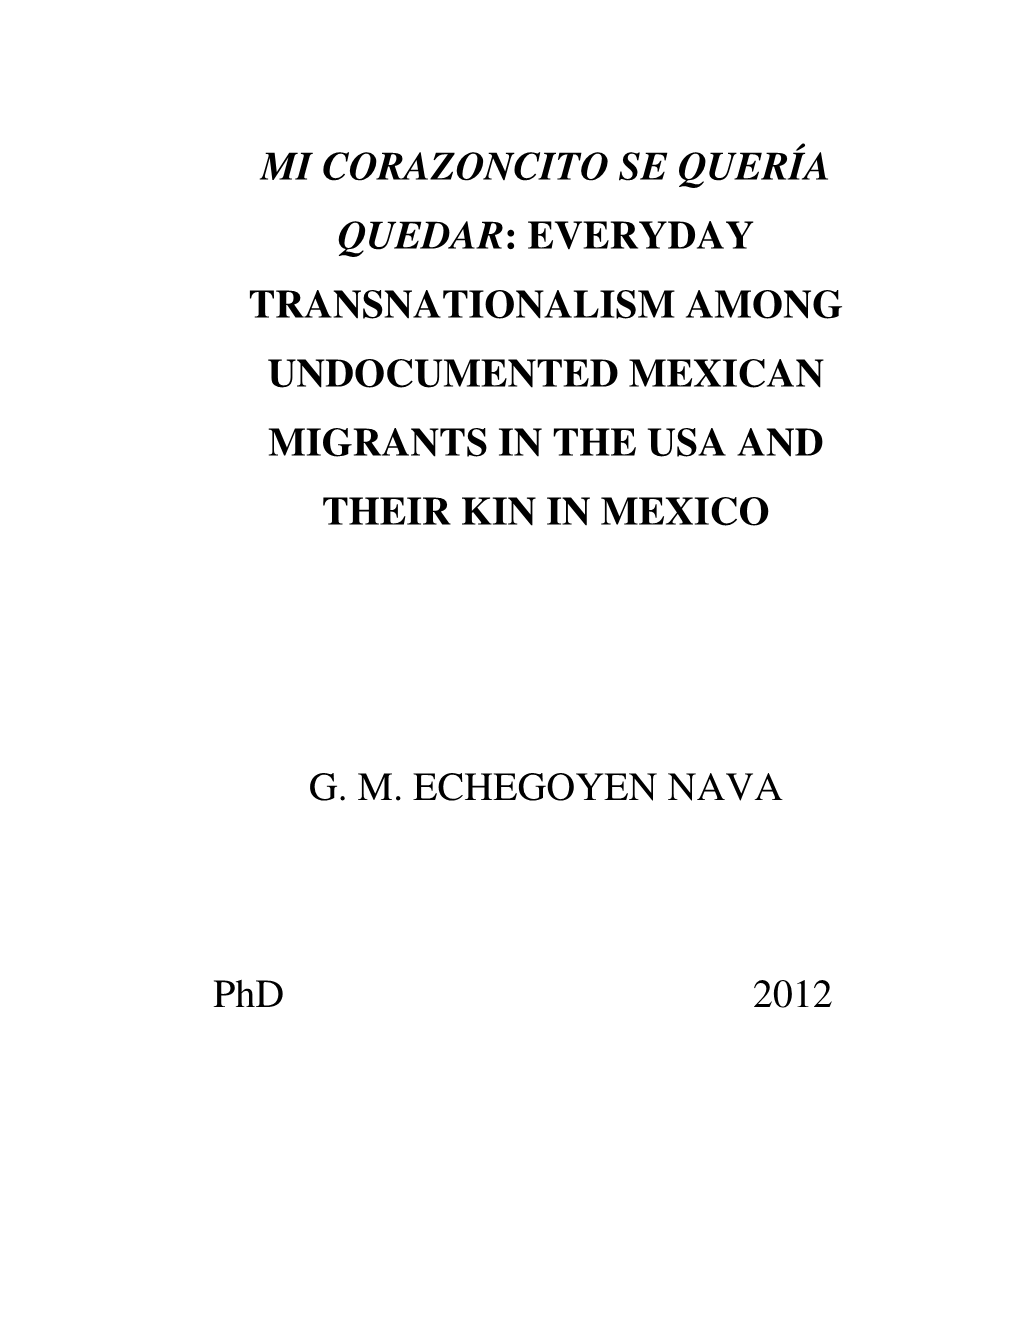 Everyday Transnationalism Among Undocumented Mexican Migrants in the Usa and Their Kin in Mexico